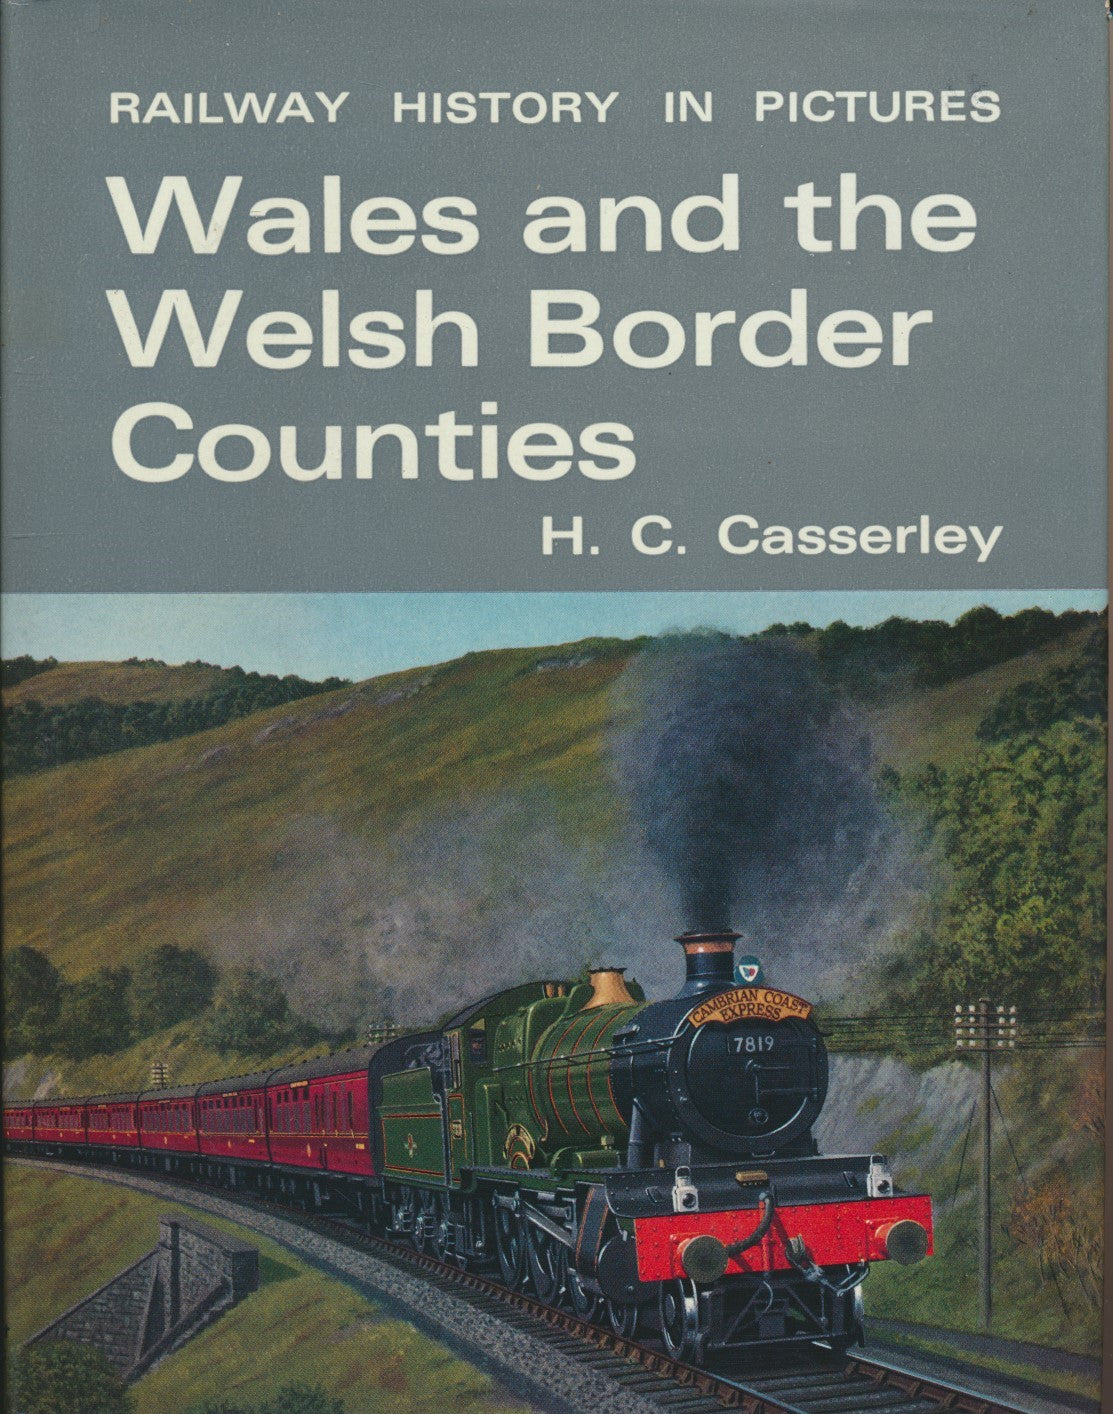 Railway History in Pictures: Wales and the Welsh Border Counties